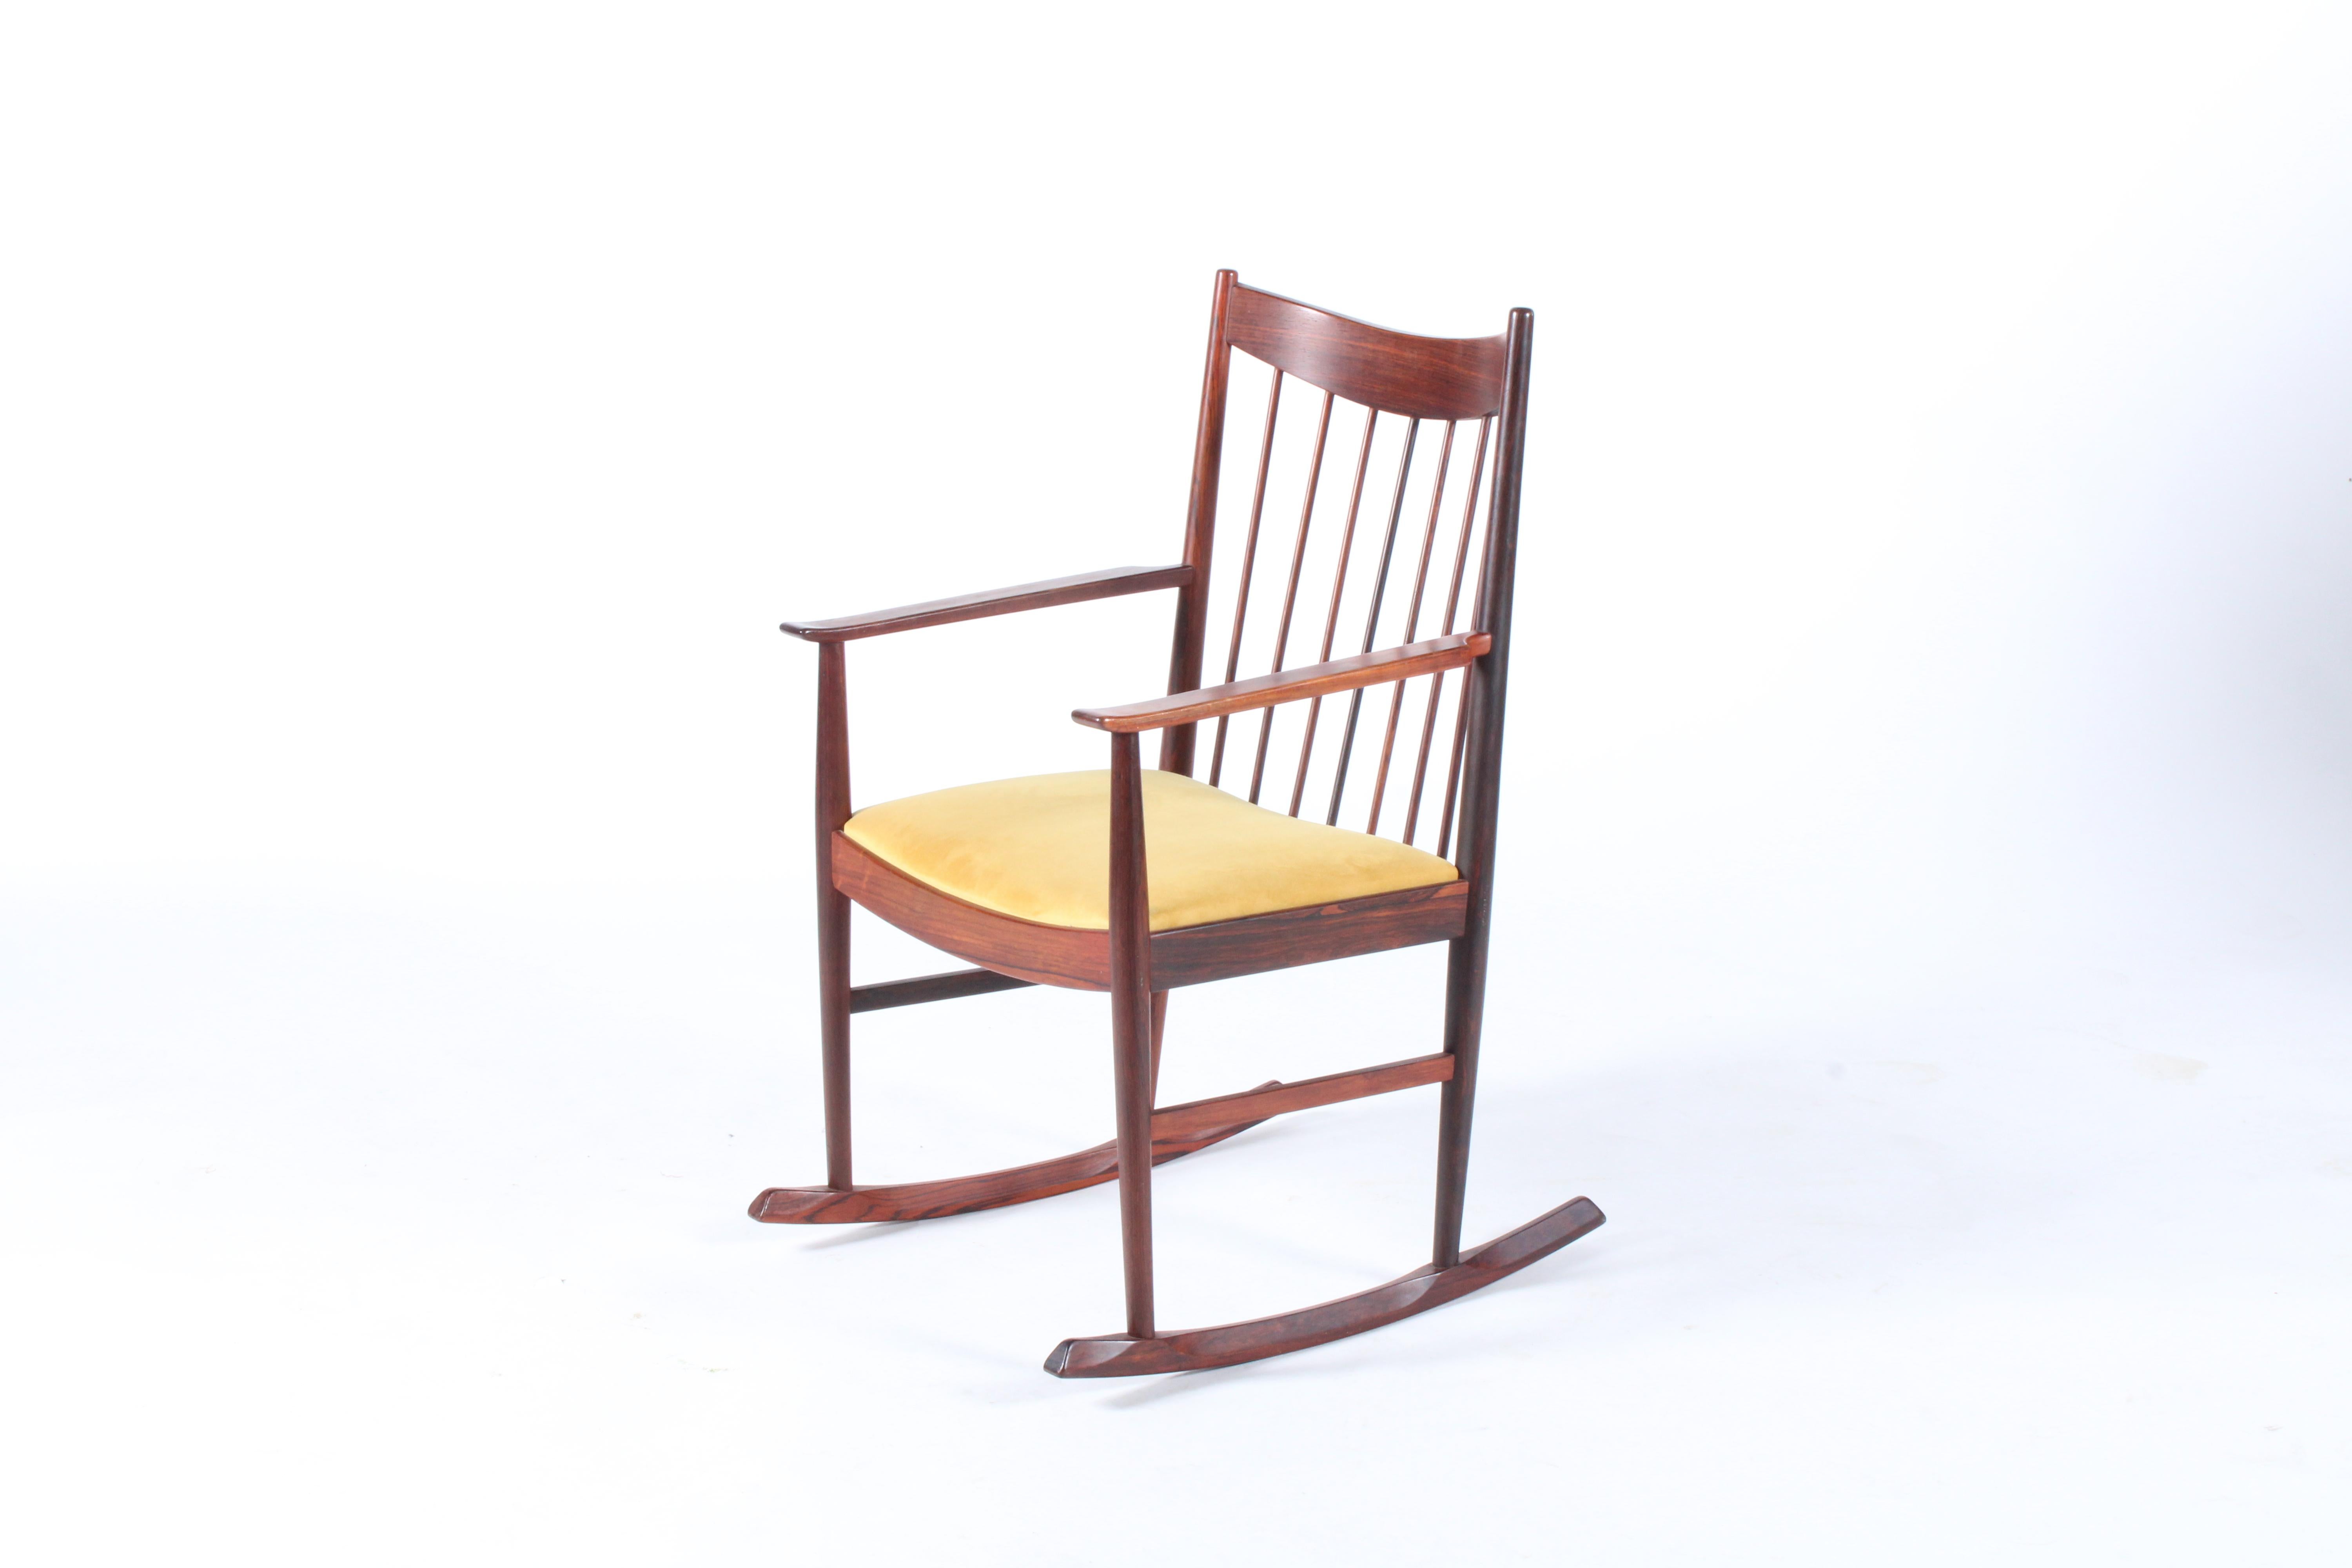 A stunning piece of Danish design, this rocking chair designed by the legendary Arne Vodder for the Sibast furniture company is madre from solid rosewood and we have had the seat newly upholstered in a fine Italian velvet. Sleek and simple lines